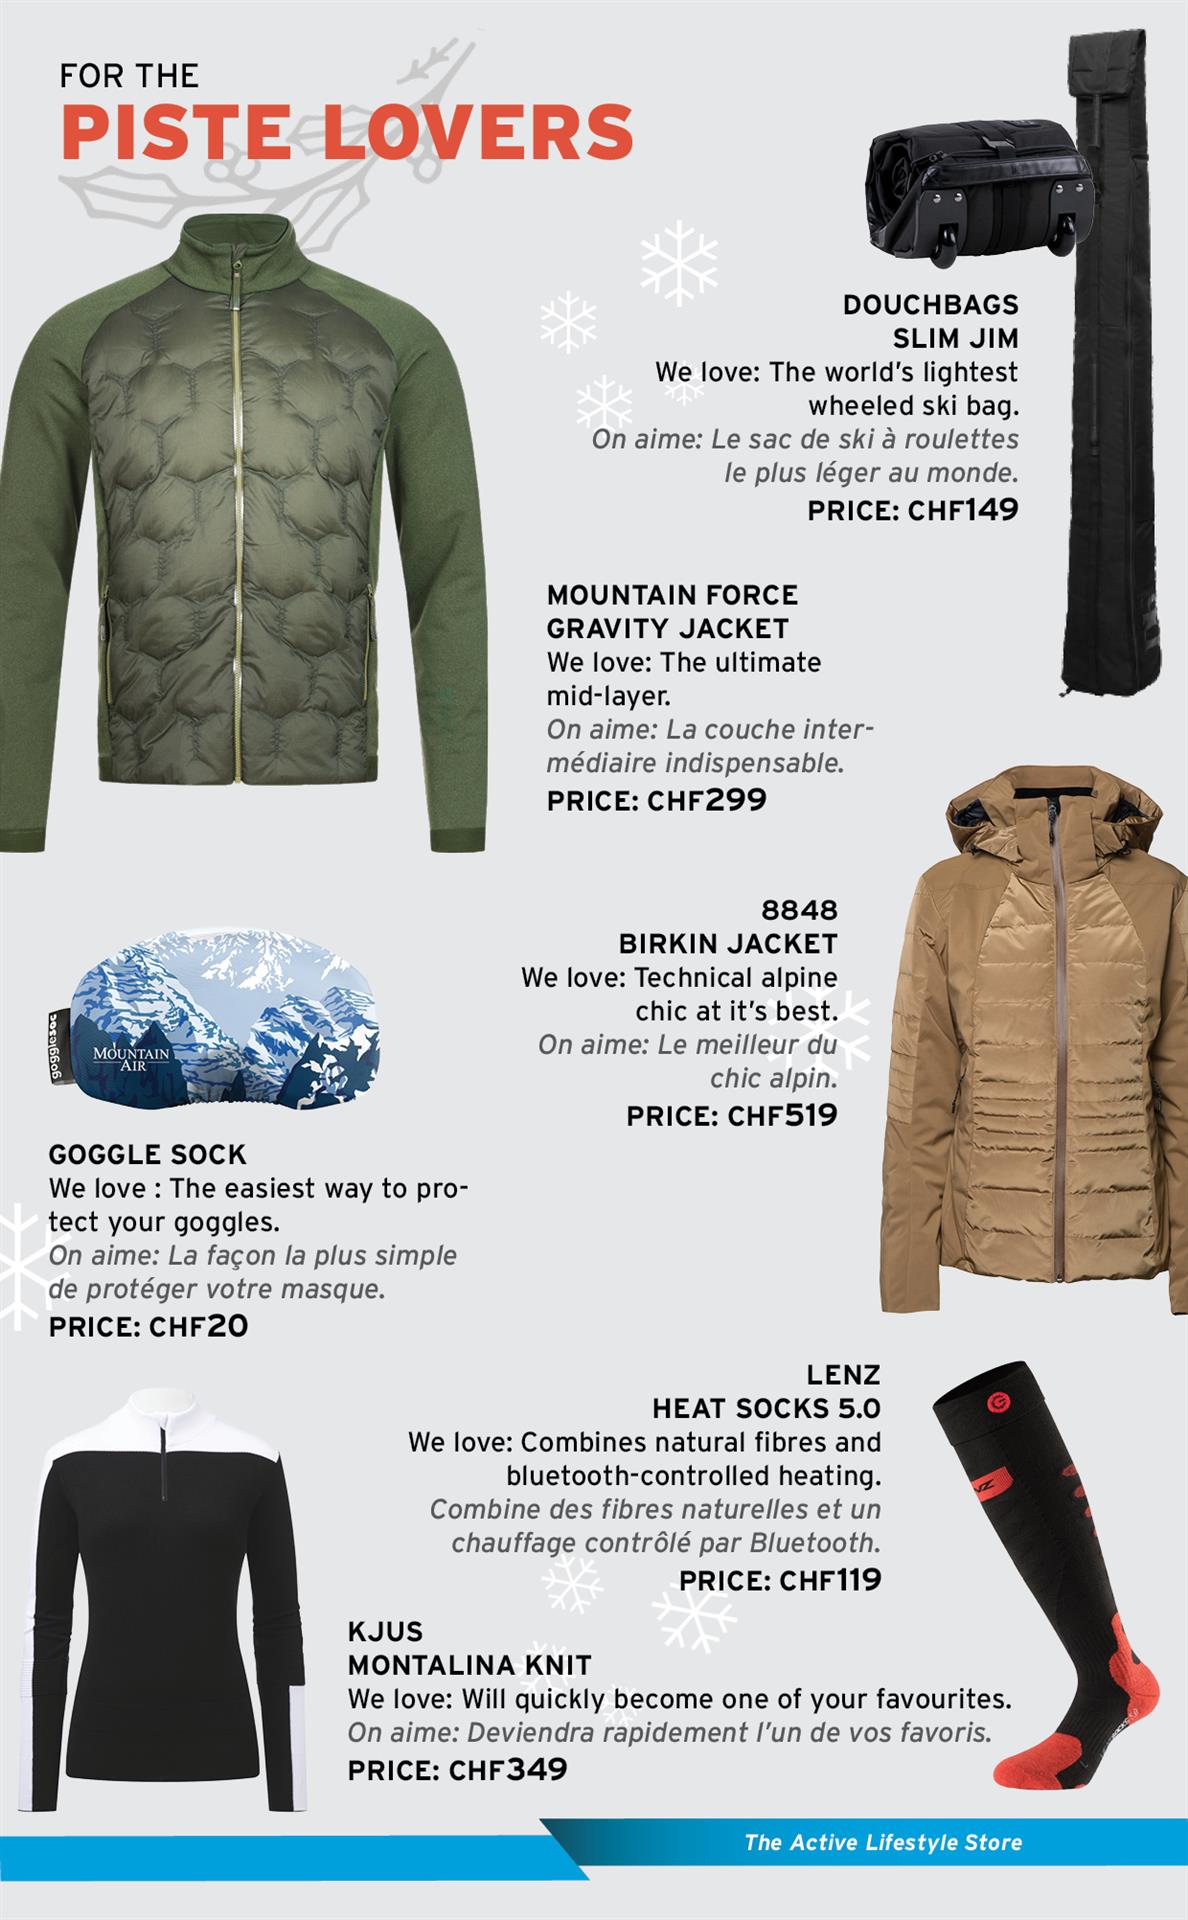 Gifts for the piste lovers